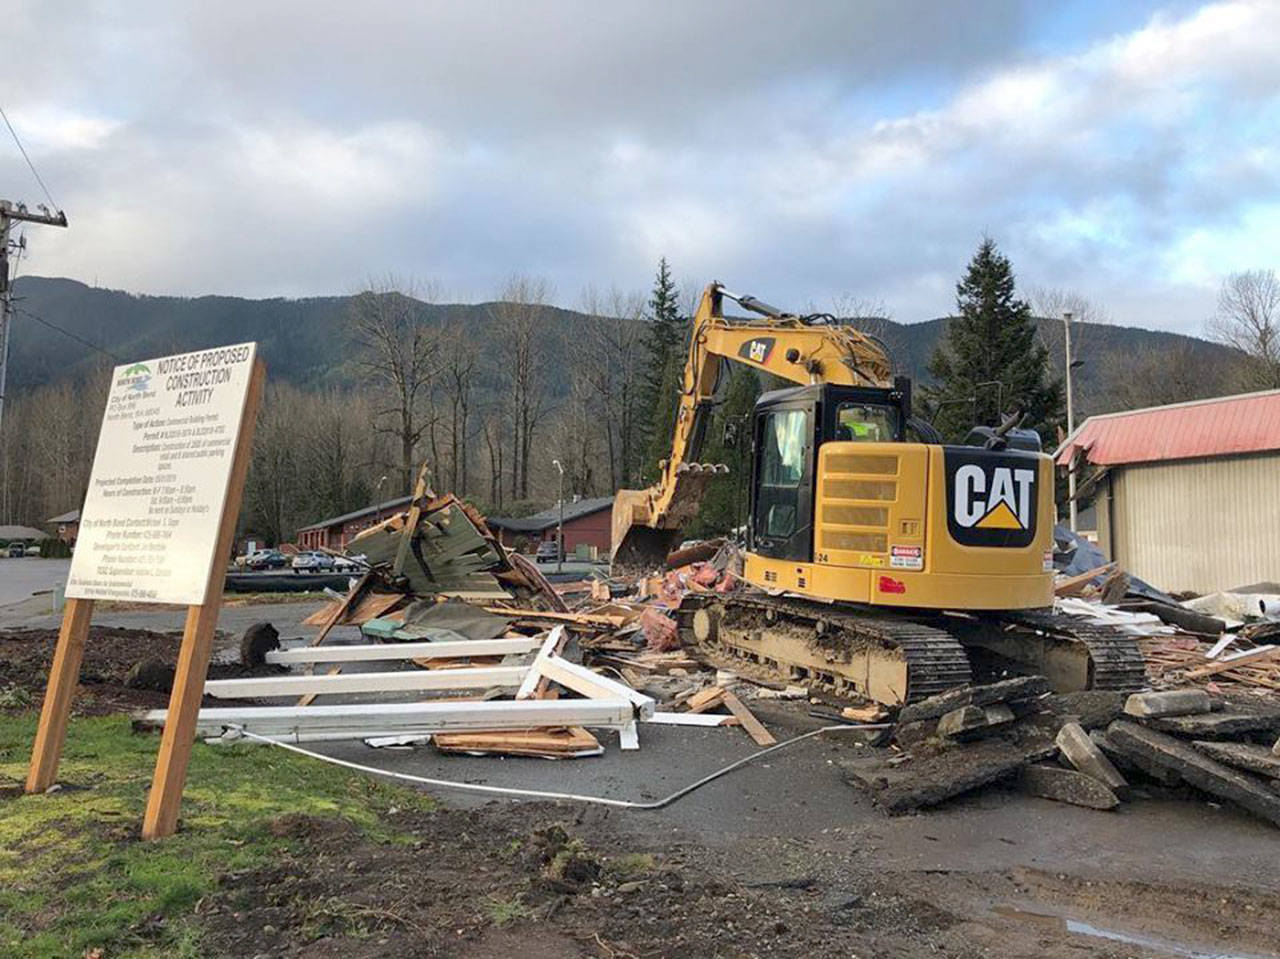 The old 200 square foot building is torn down to prepare for the groundbreaking on the new Huxdotter project in December 2018. Courtesy Photo